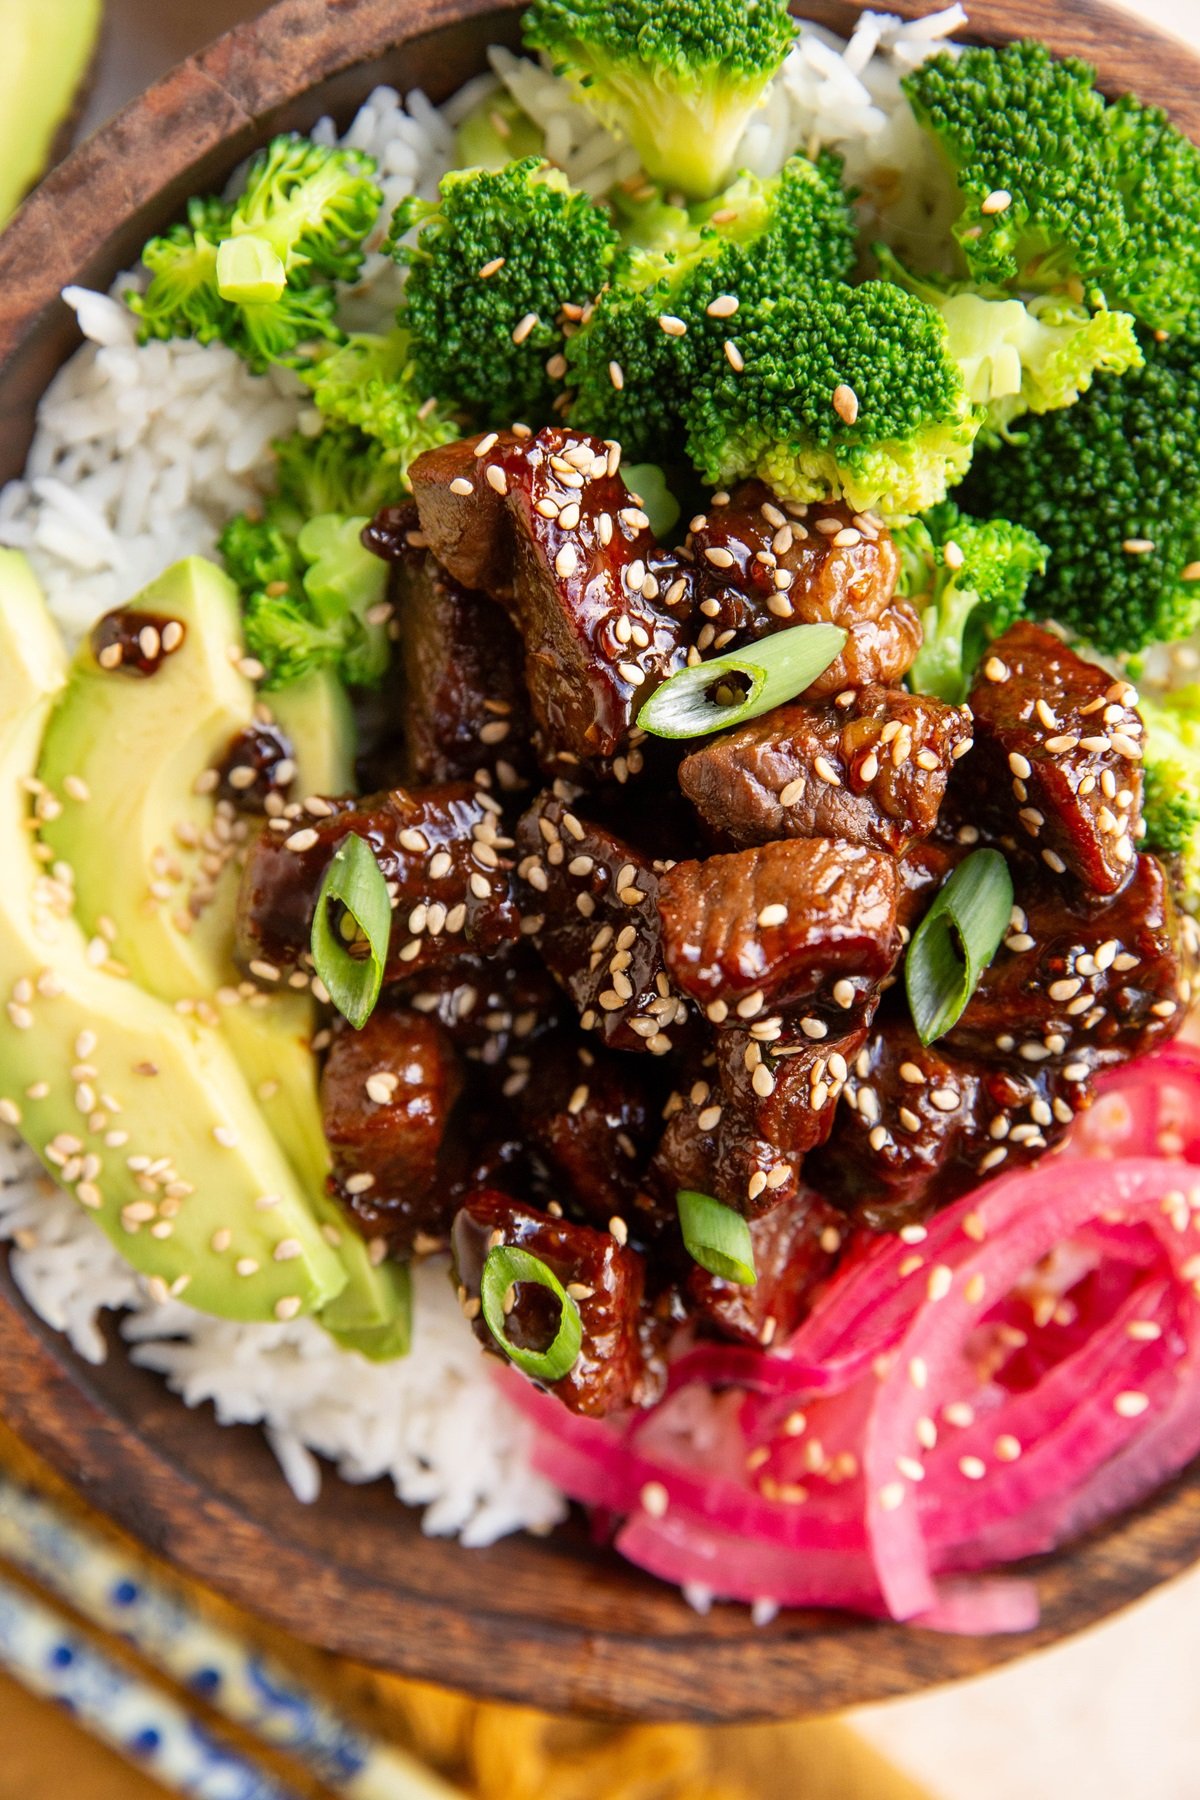 Sticky steak and rice bowls with a savory sweet sauce.